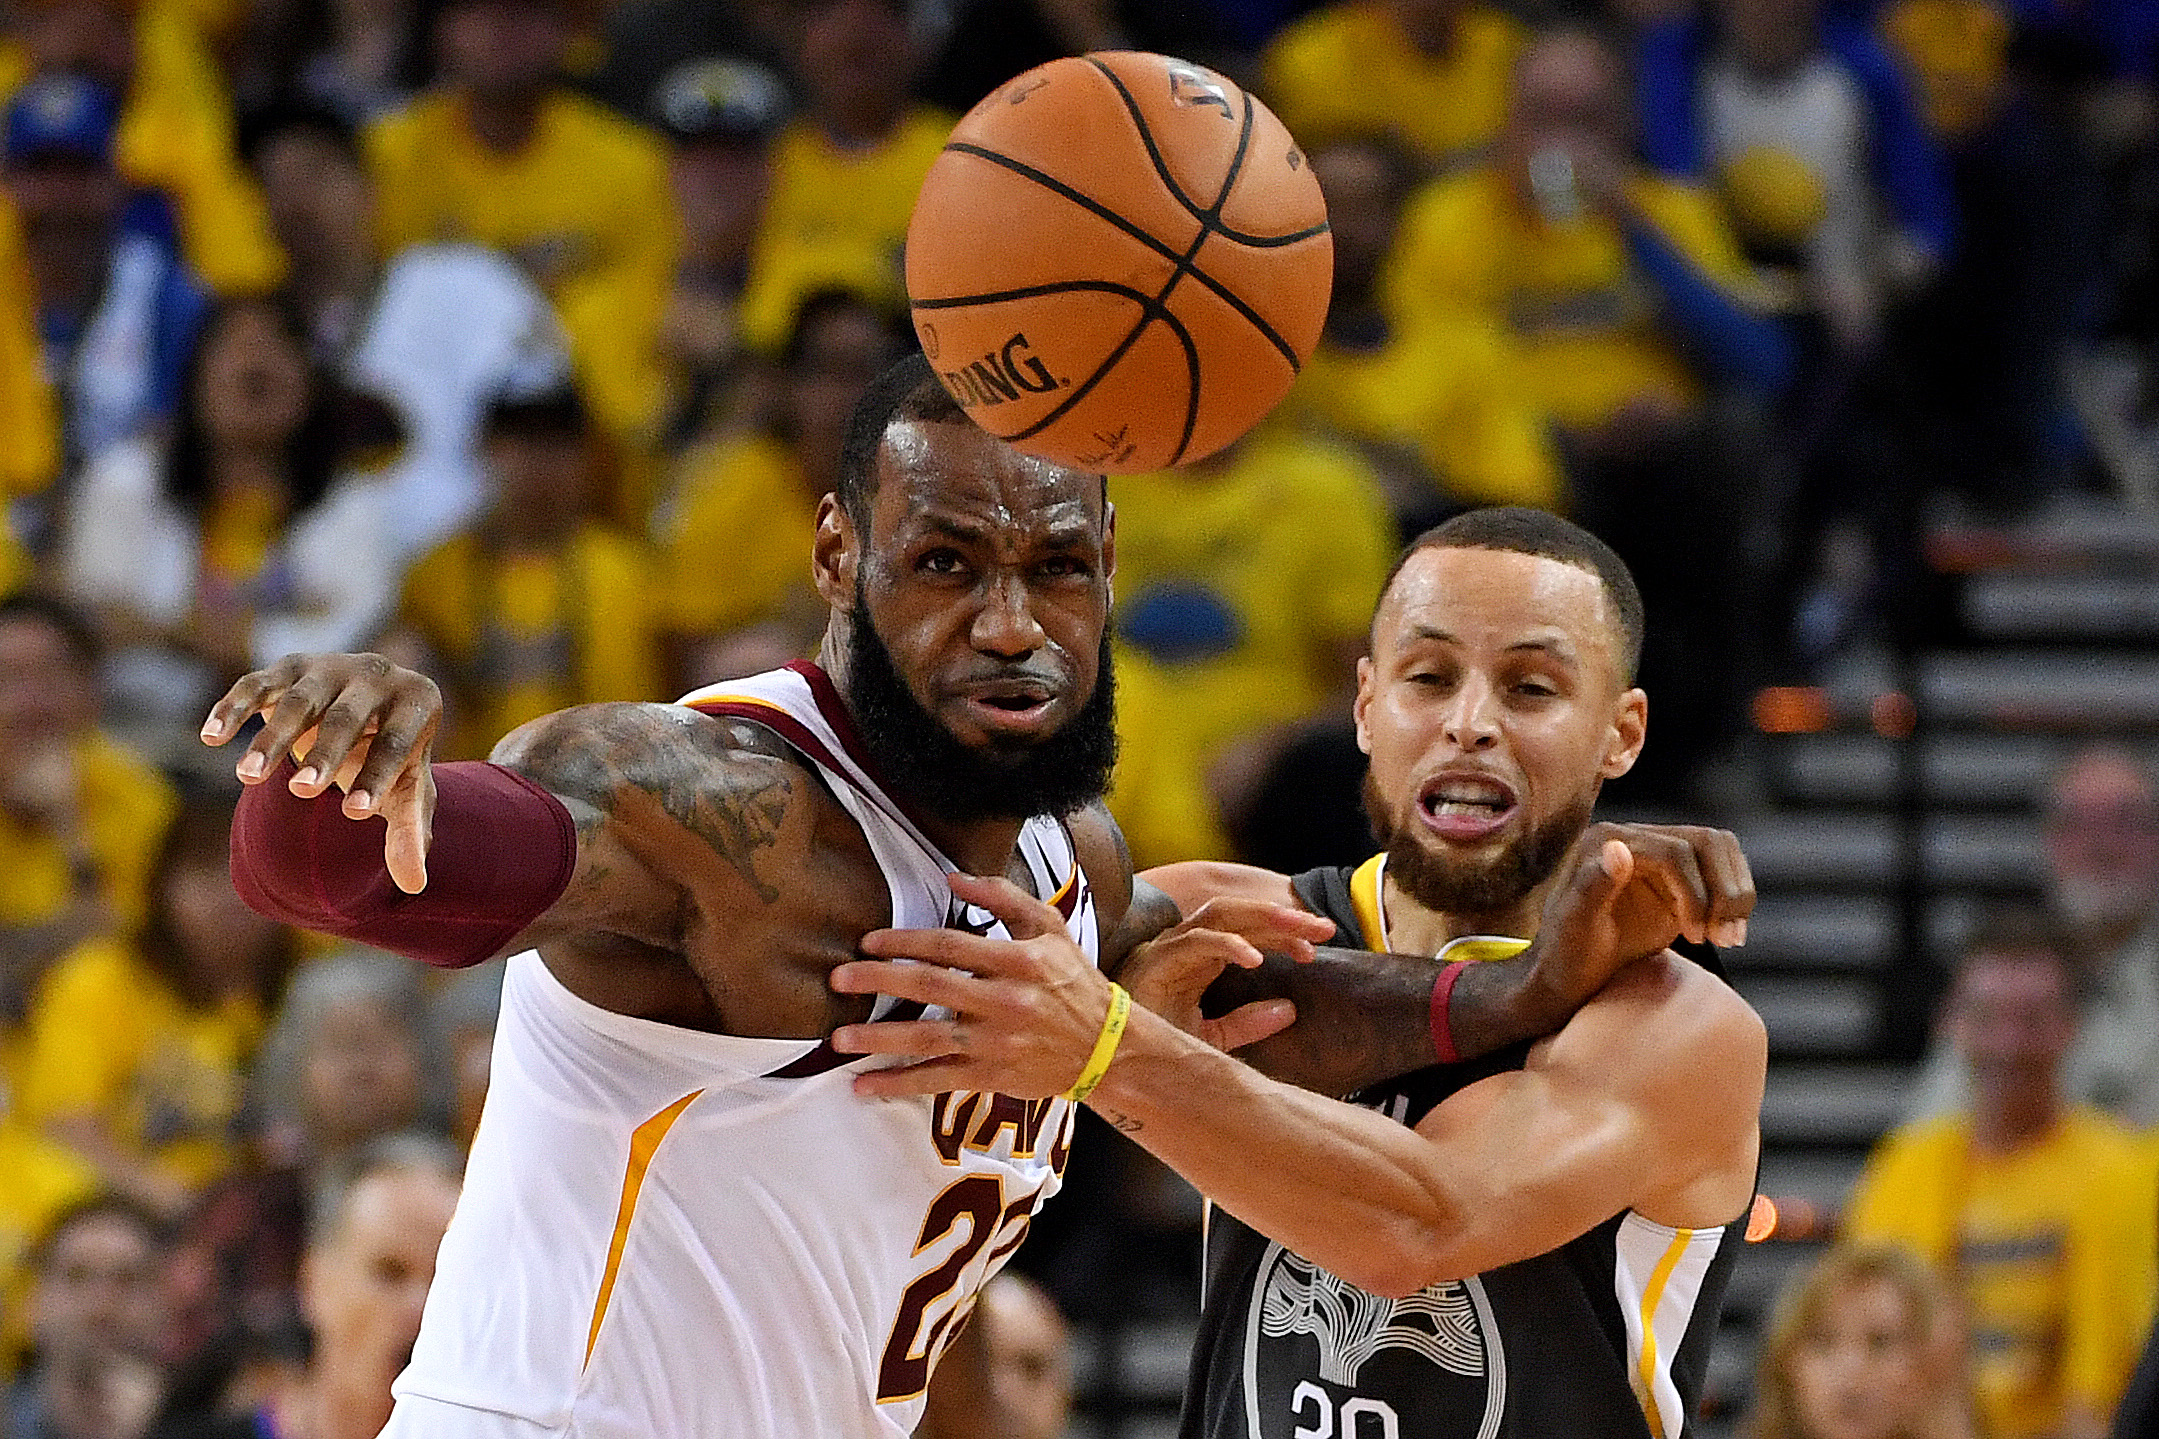 LeBron James, Steph Curry to renew rivalry in Play-In Tournament